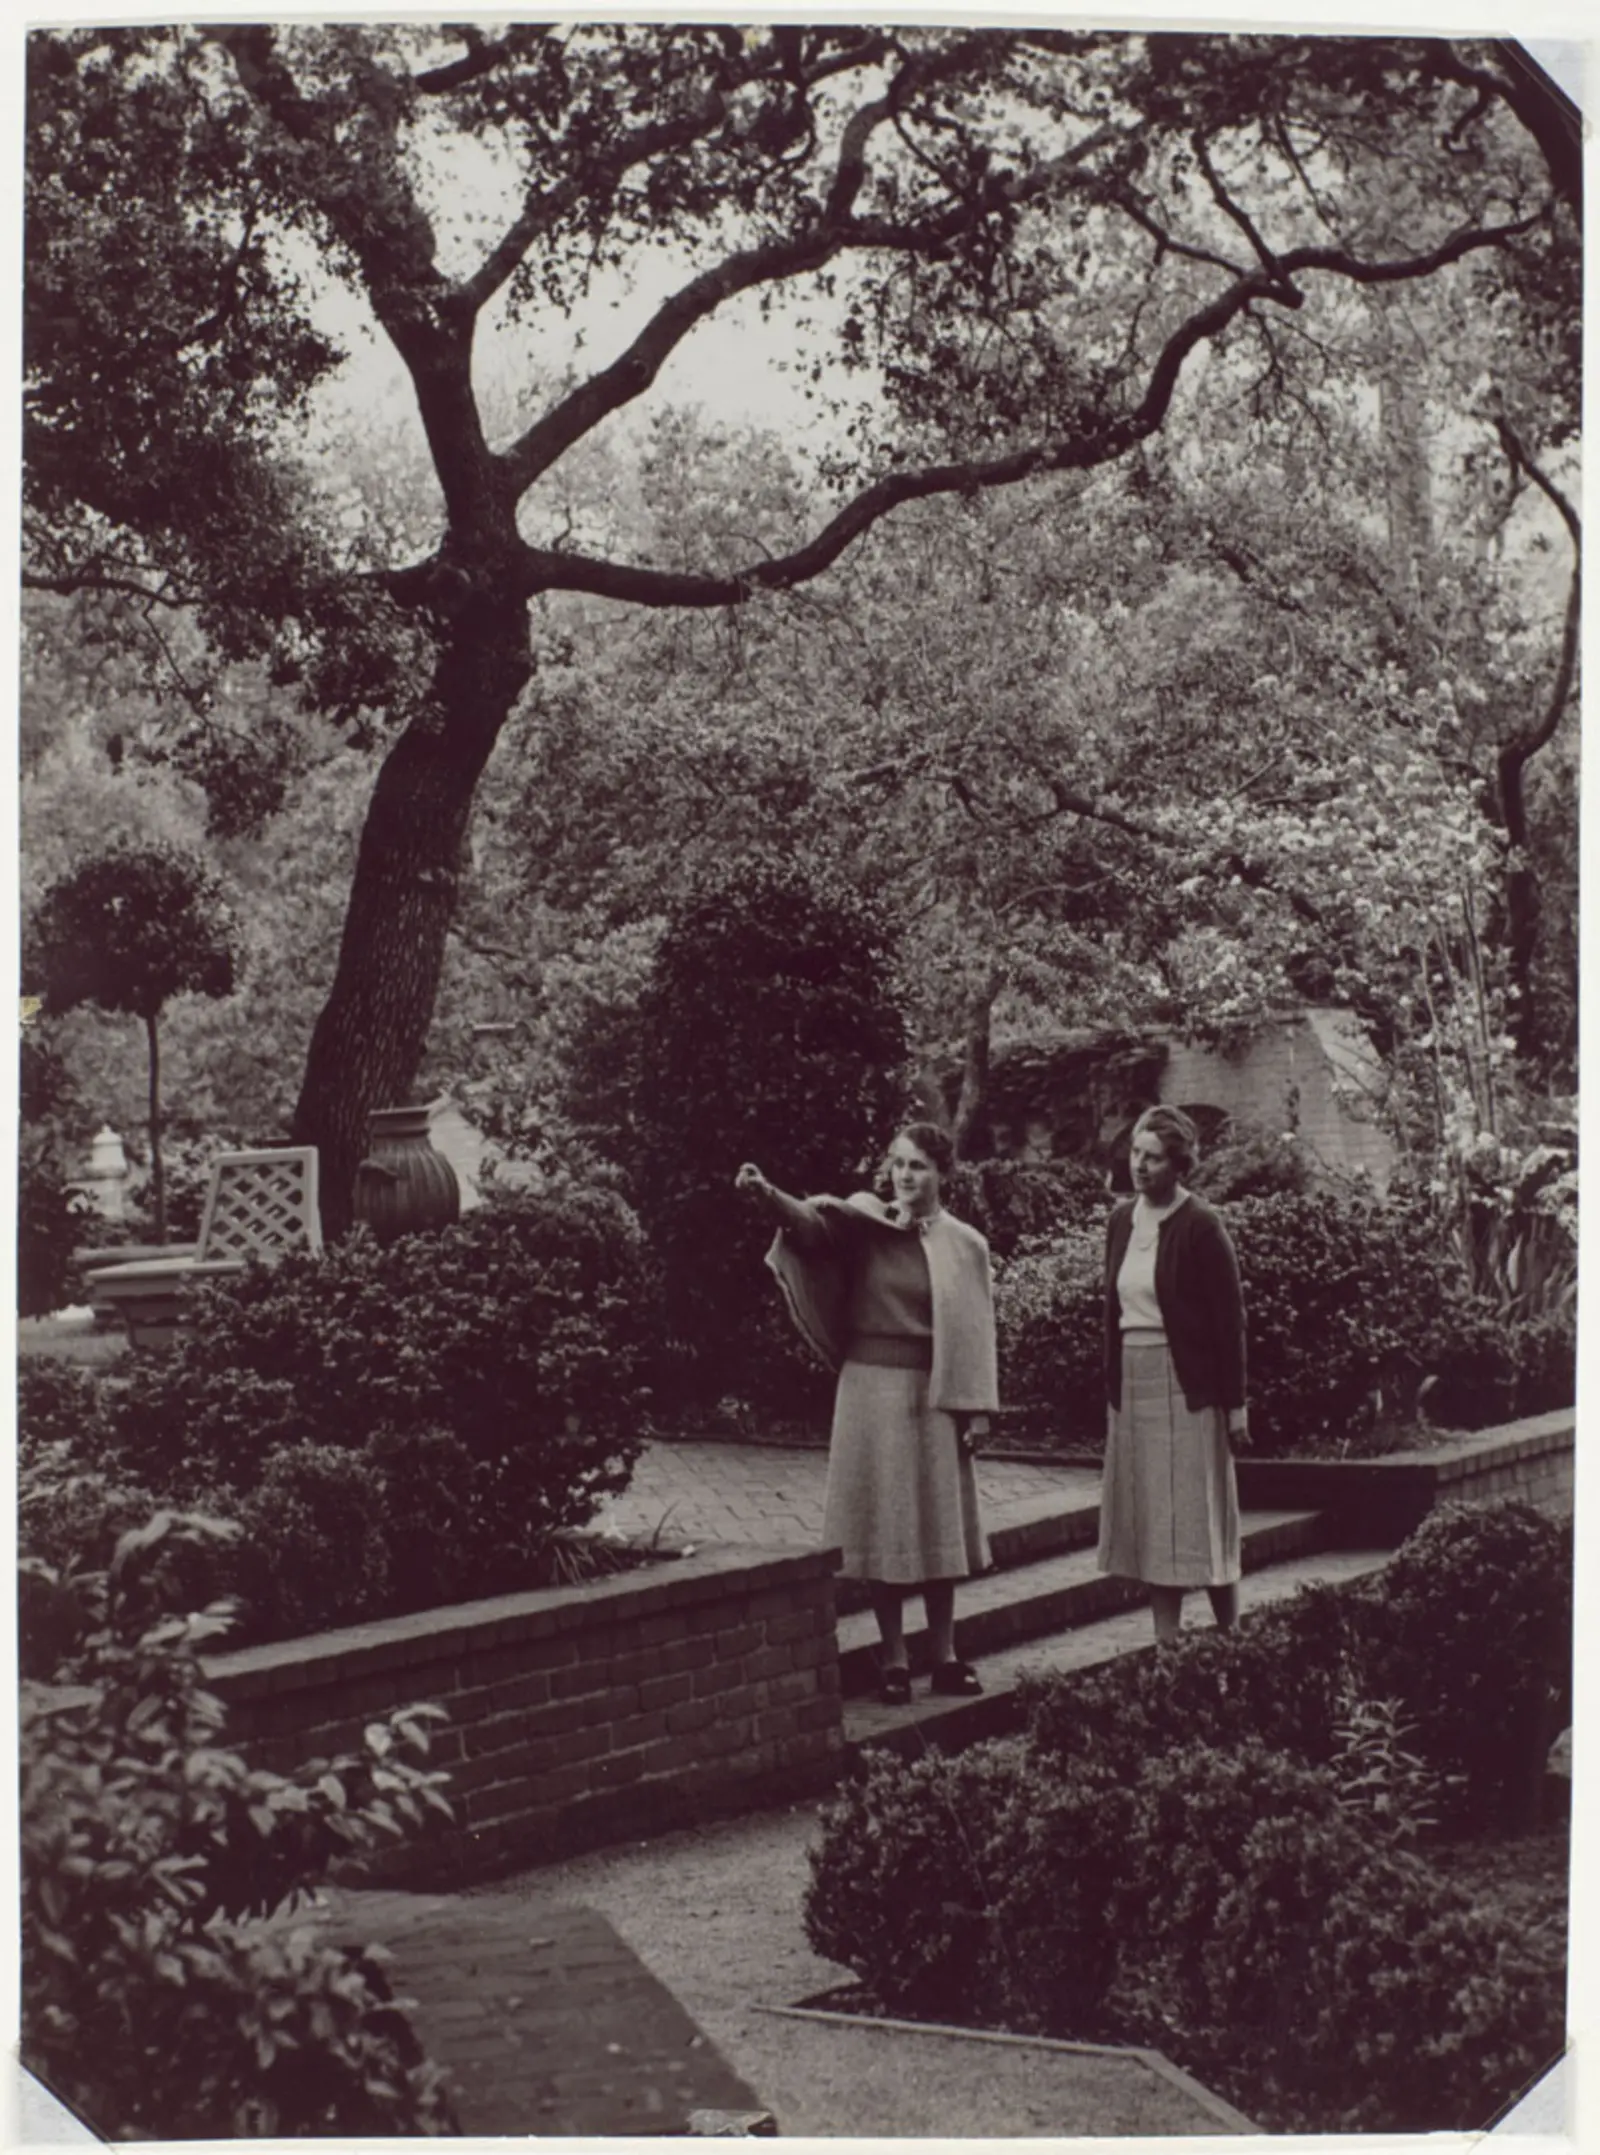 A grayscale photo of two people in a mature garden.